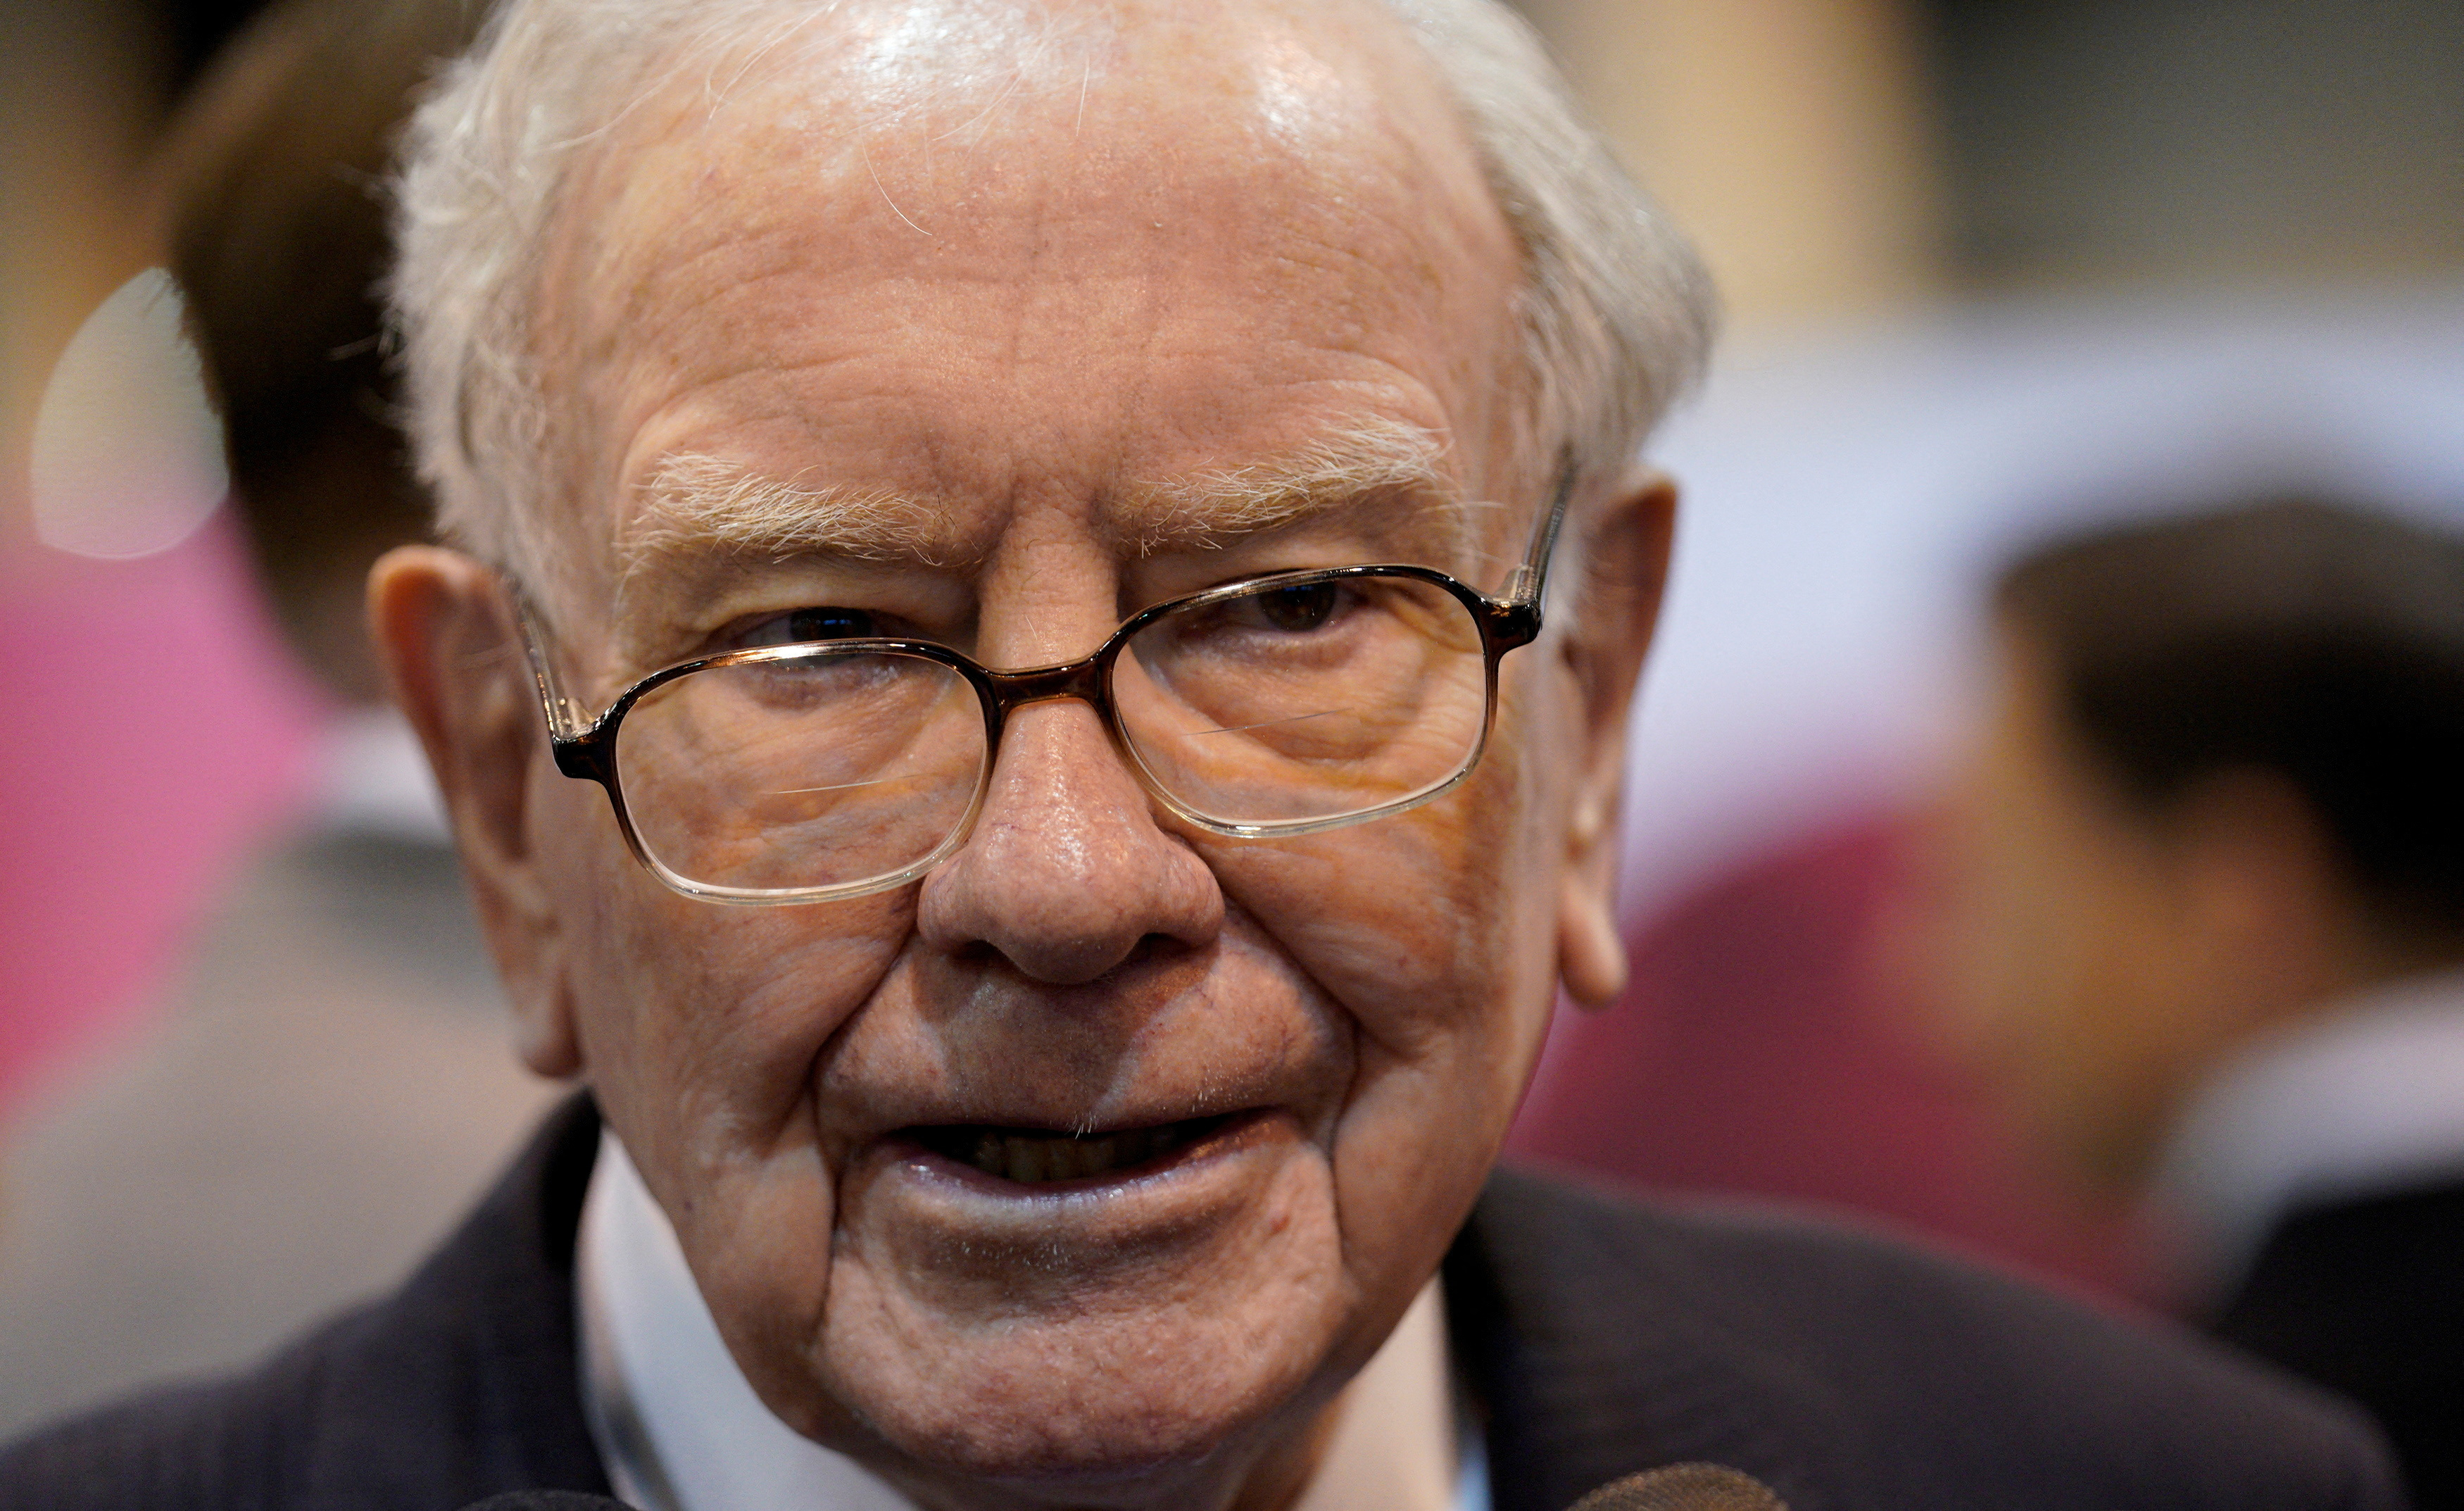 Warren Buffett, CEO of Berkshire Hathaway Inc, tours the exhibit hall at the company's annual meeting in Omaha